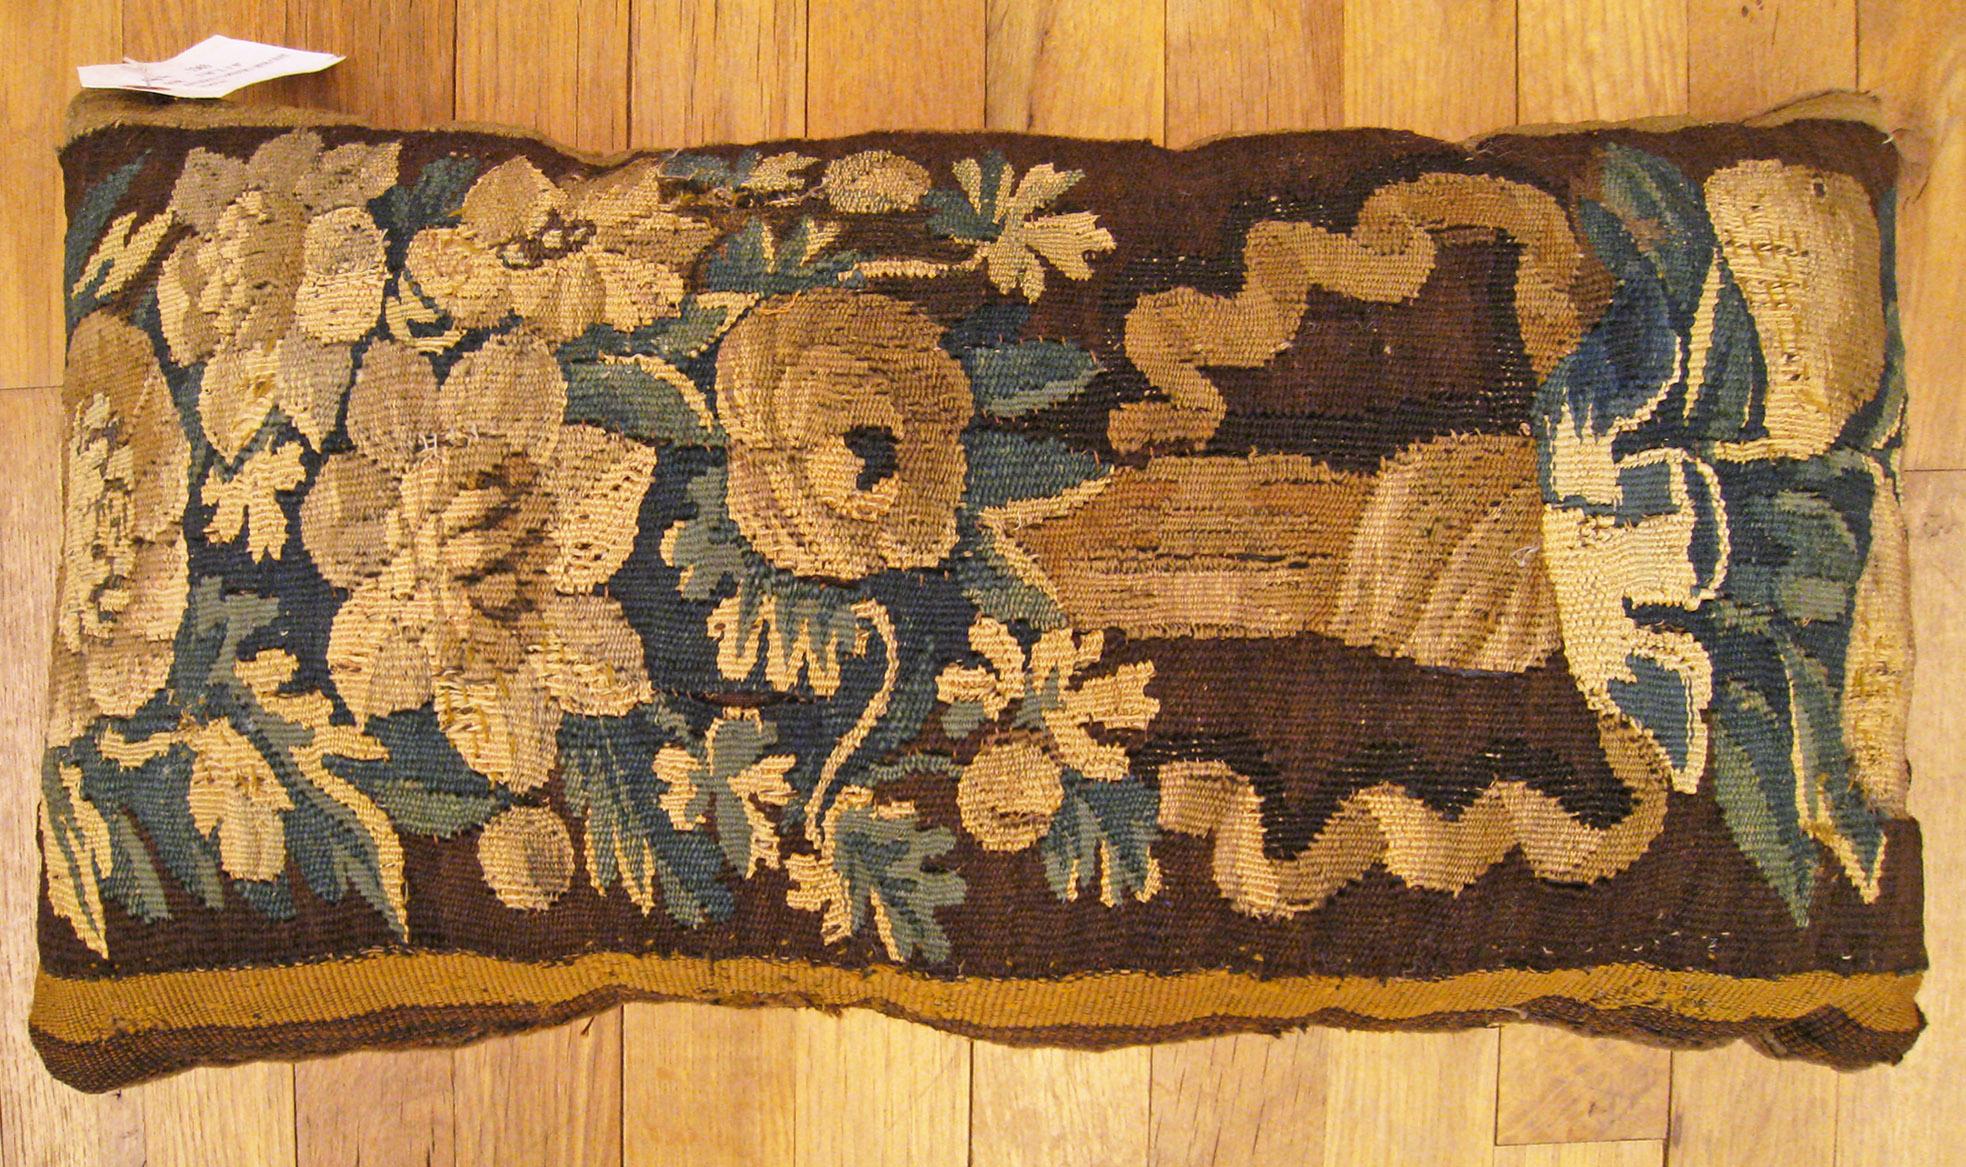 Antique 18th Century Tapestry Pillow; size 1'0” x 1'10”.

An antique decorative pillow with floral elements allover a brown central field, size 1'0” x 1'10”. This lovely decorative pillow features an antique fabric of a 18th century tapestry on